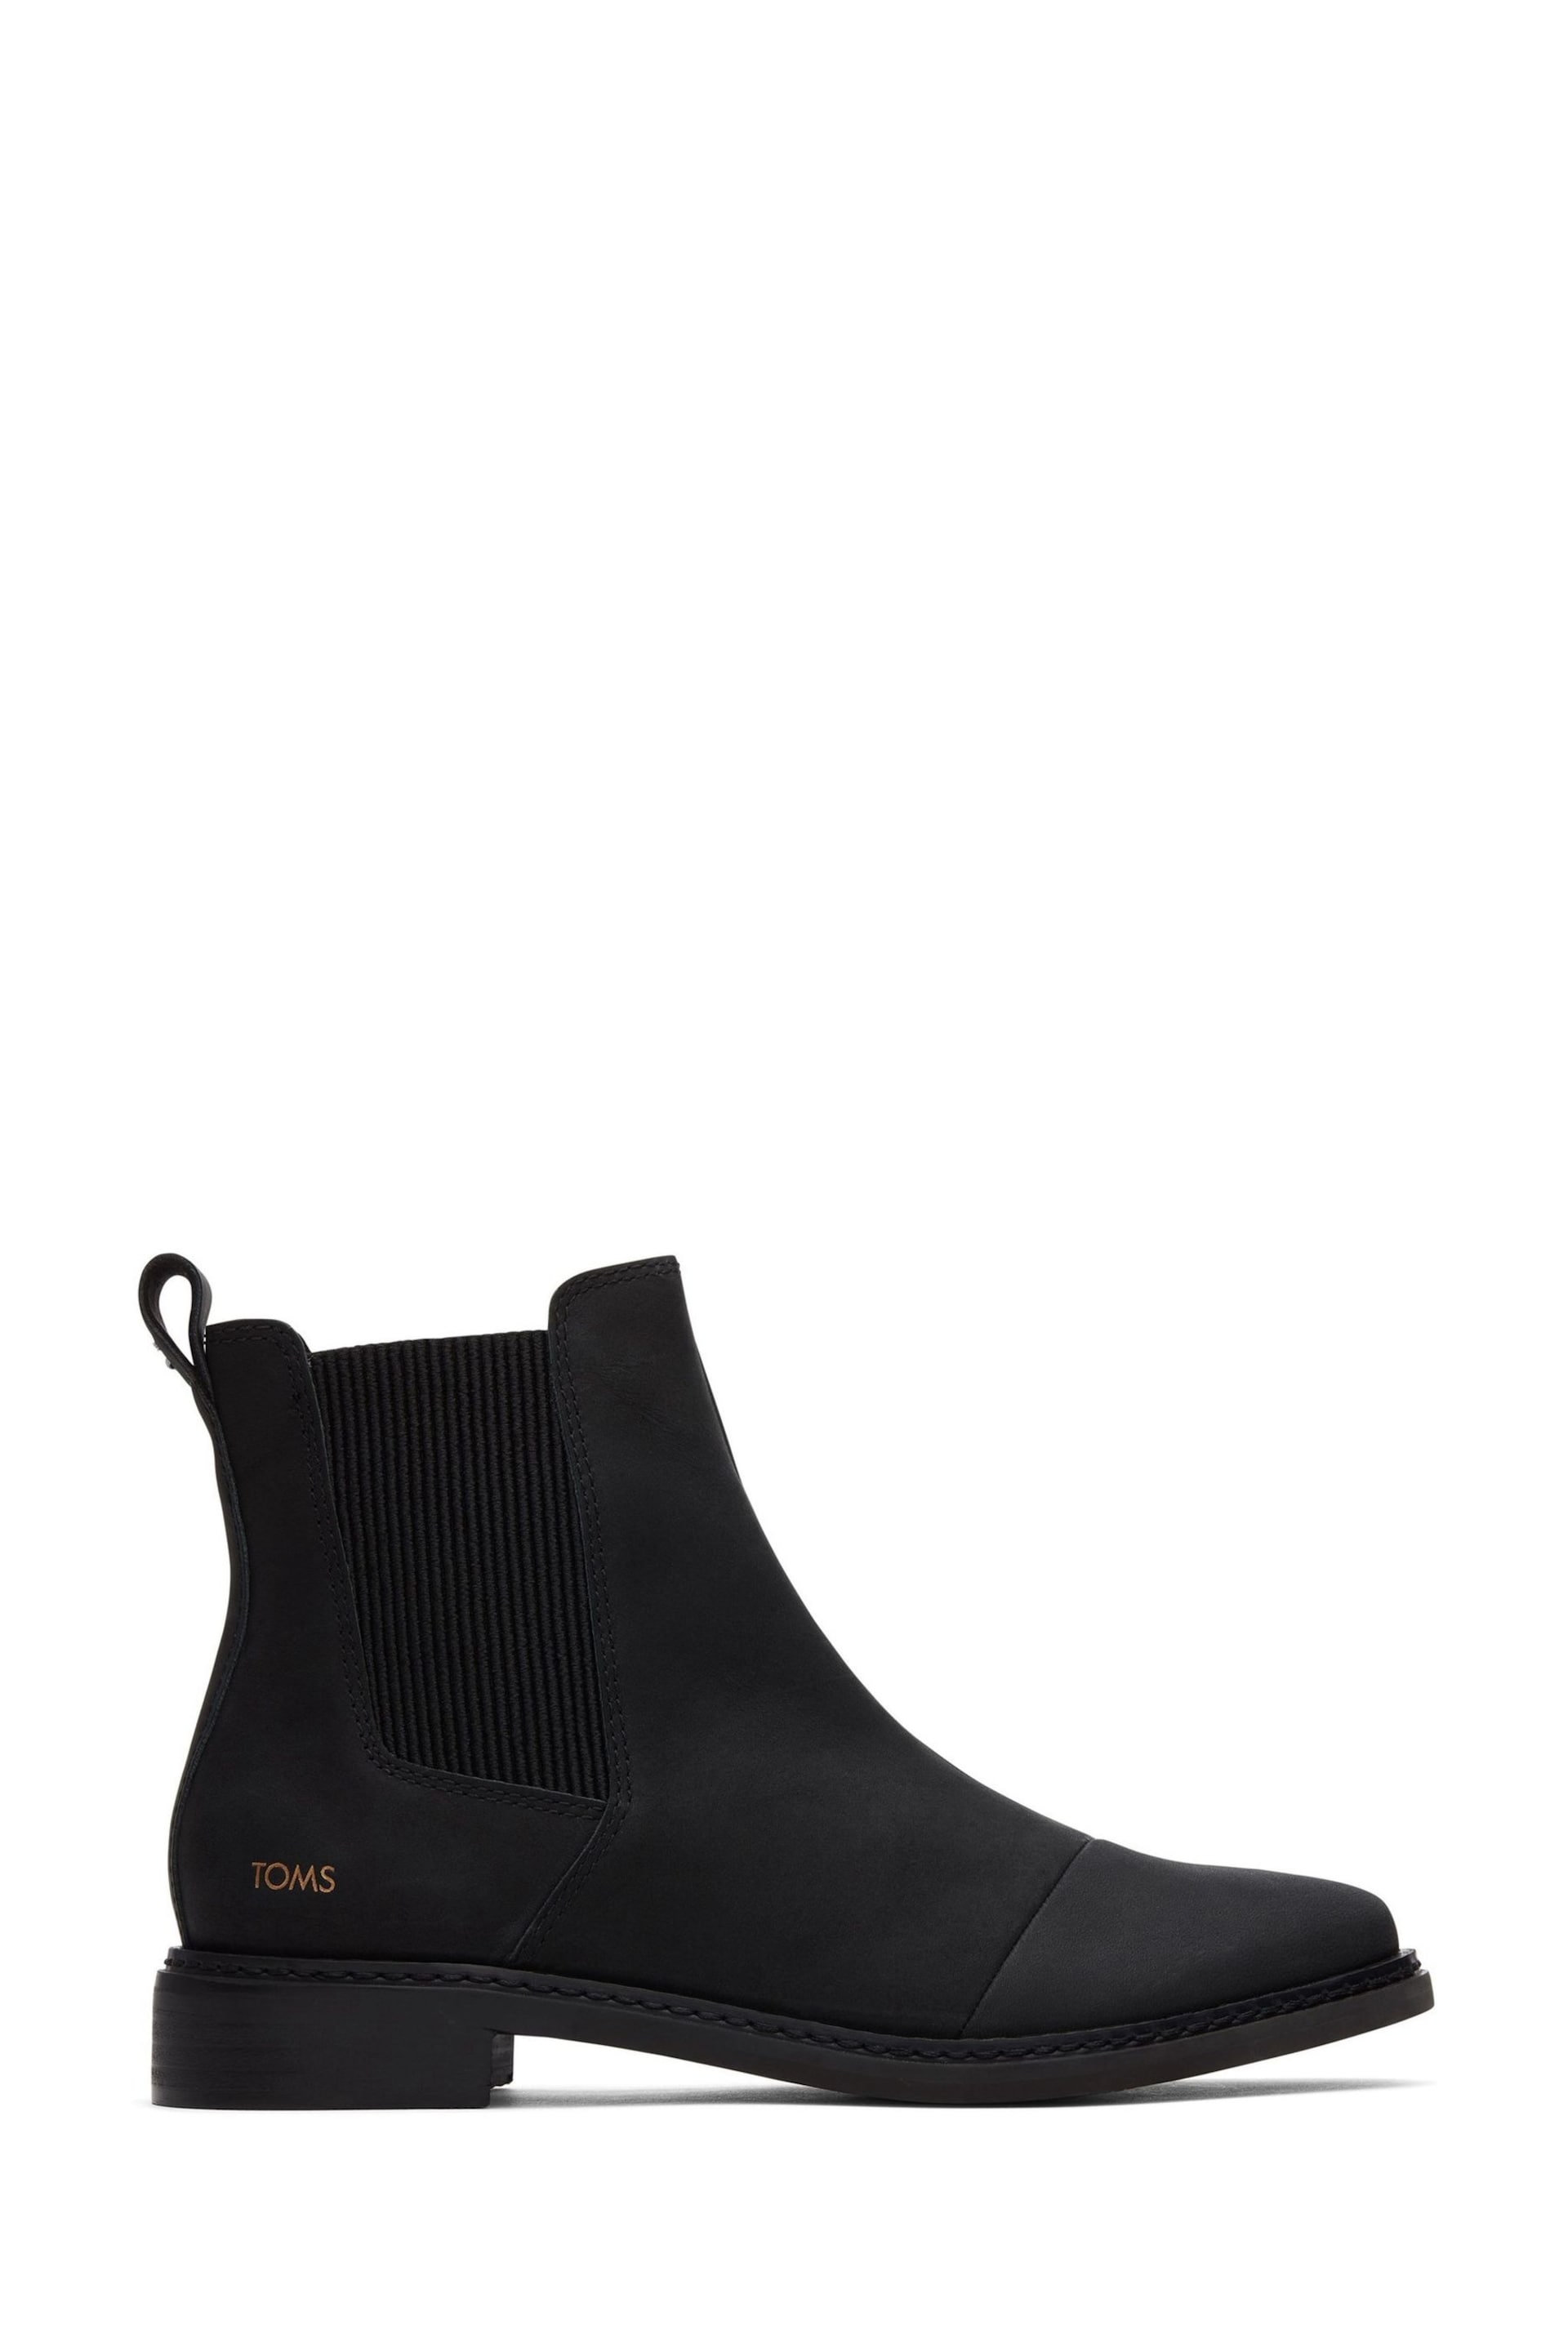 TOMS Charlie Black Leather Chelsea Boots - Image 1 of 11